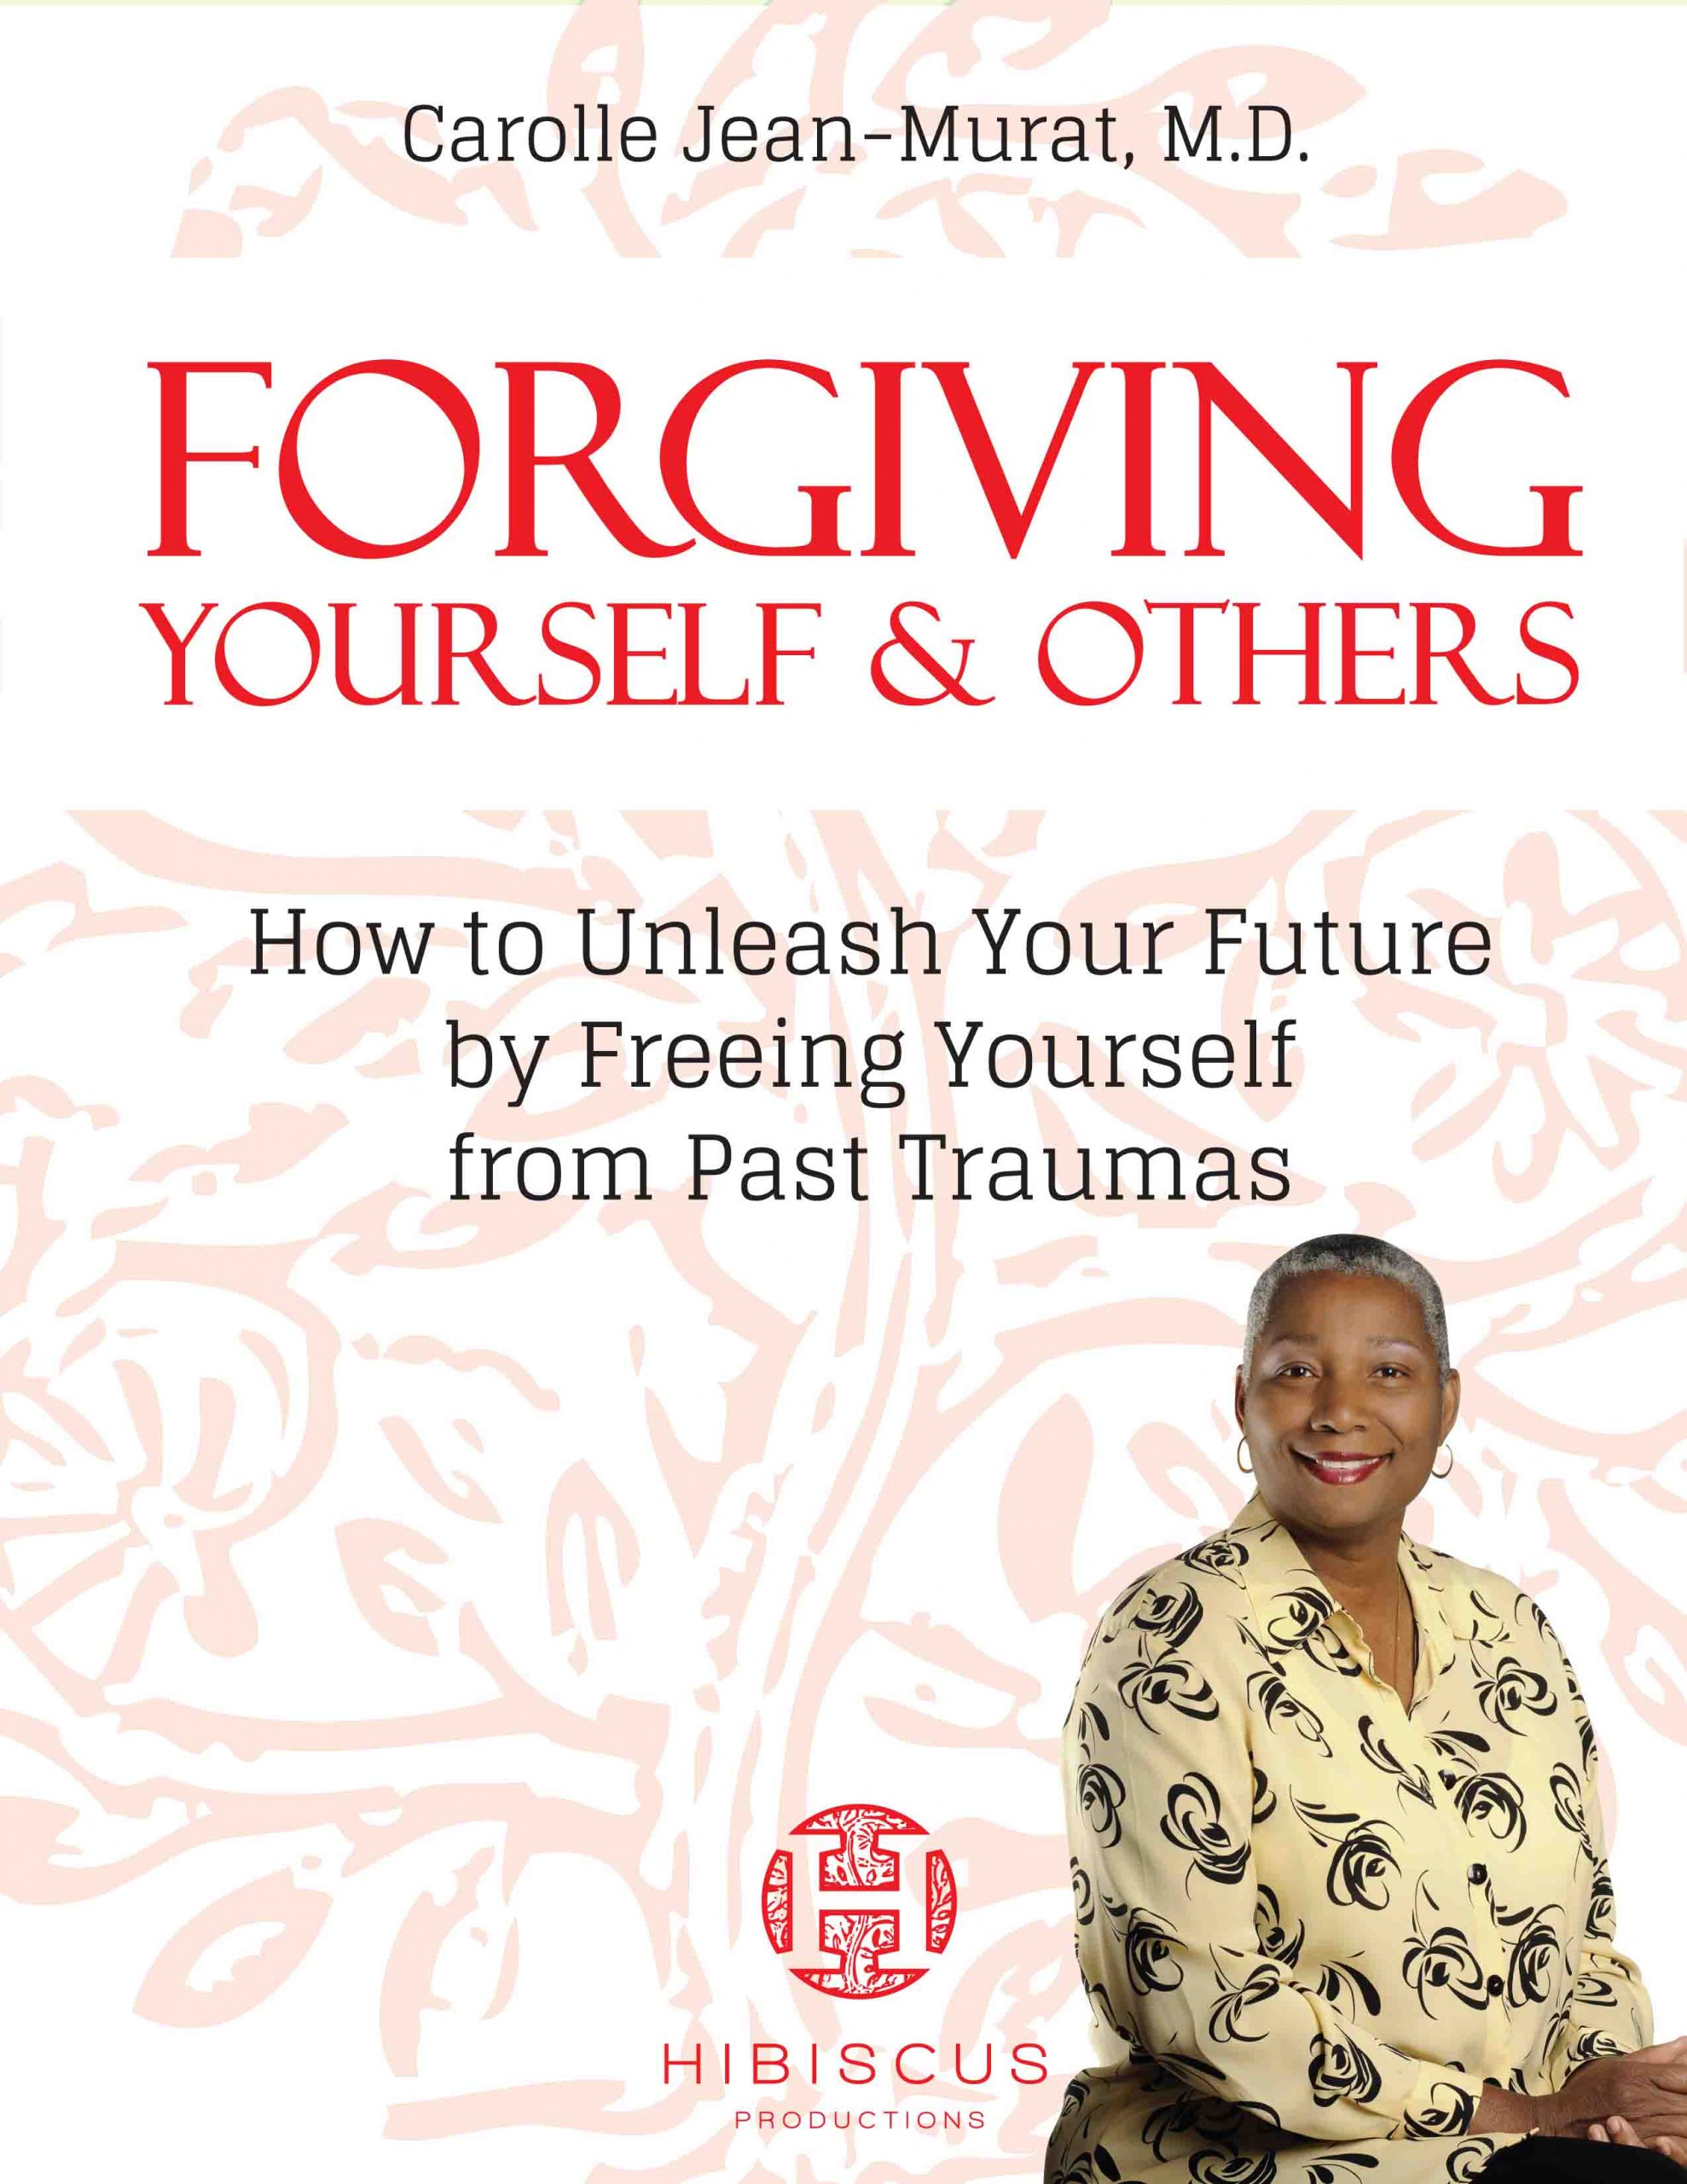 Books by Dr. Carolle, Forgiving Yourself and others: How to Unleash Your Future by Freeing Yourself from Past Traumas